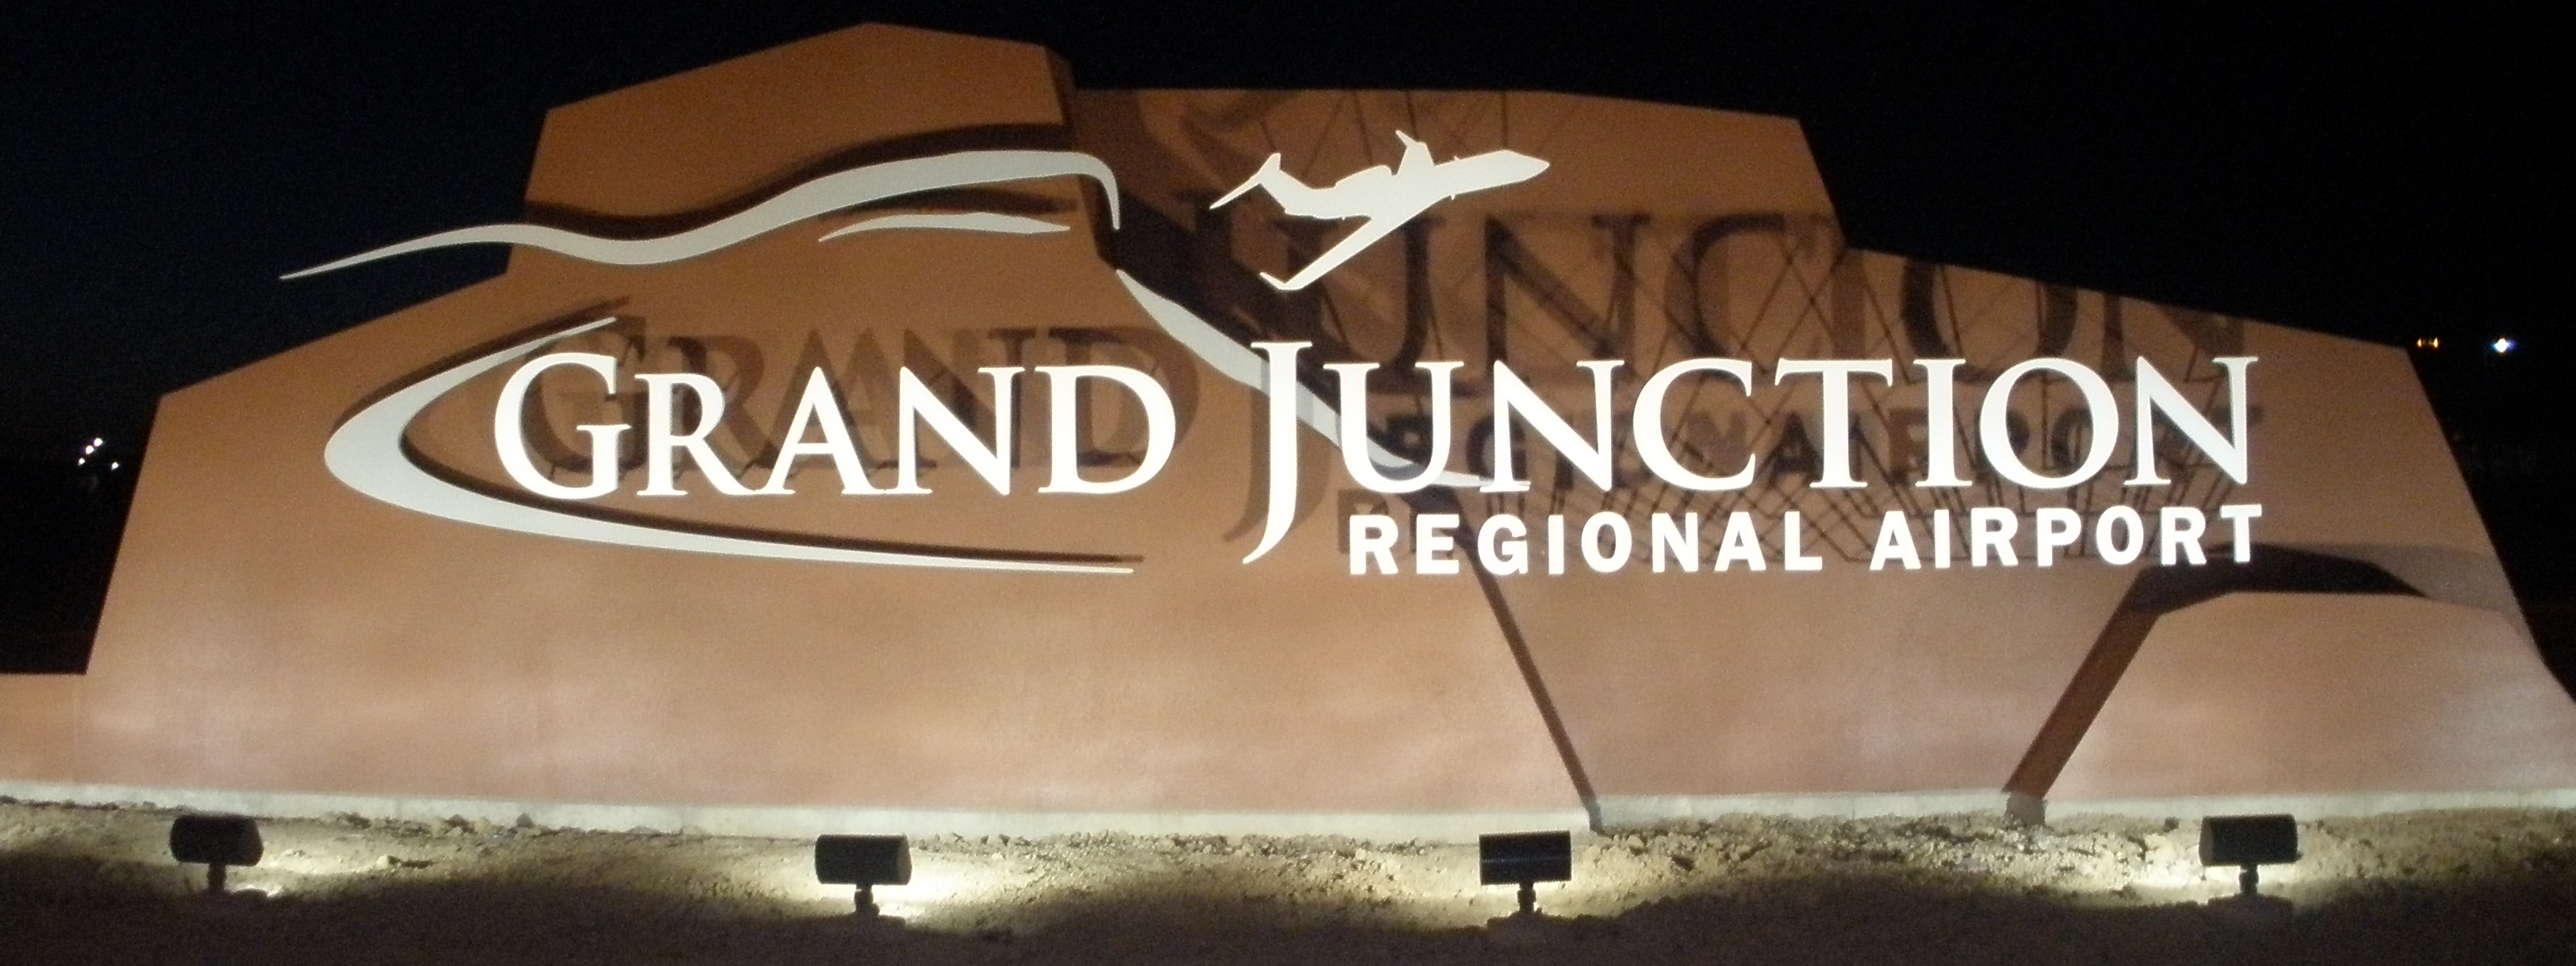 Grand Junction Regional Airport - Change is in the air | Business View